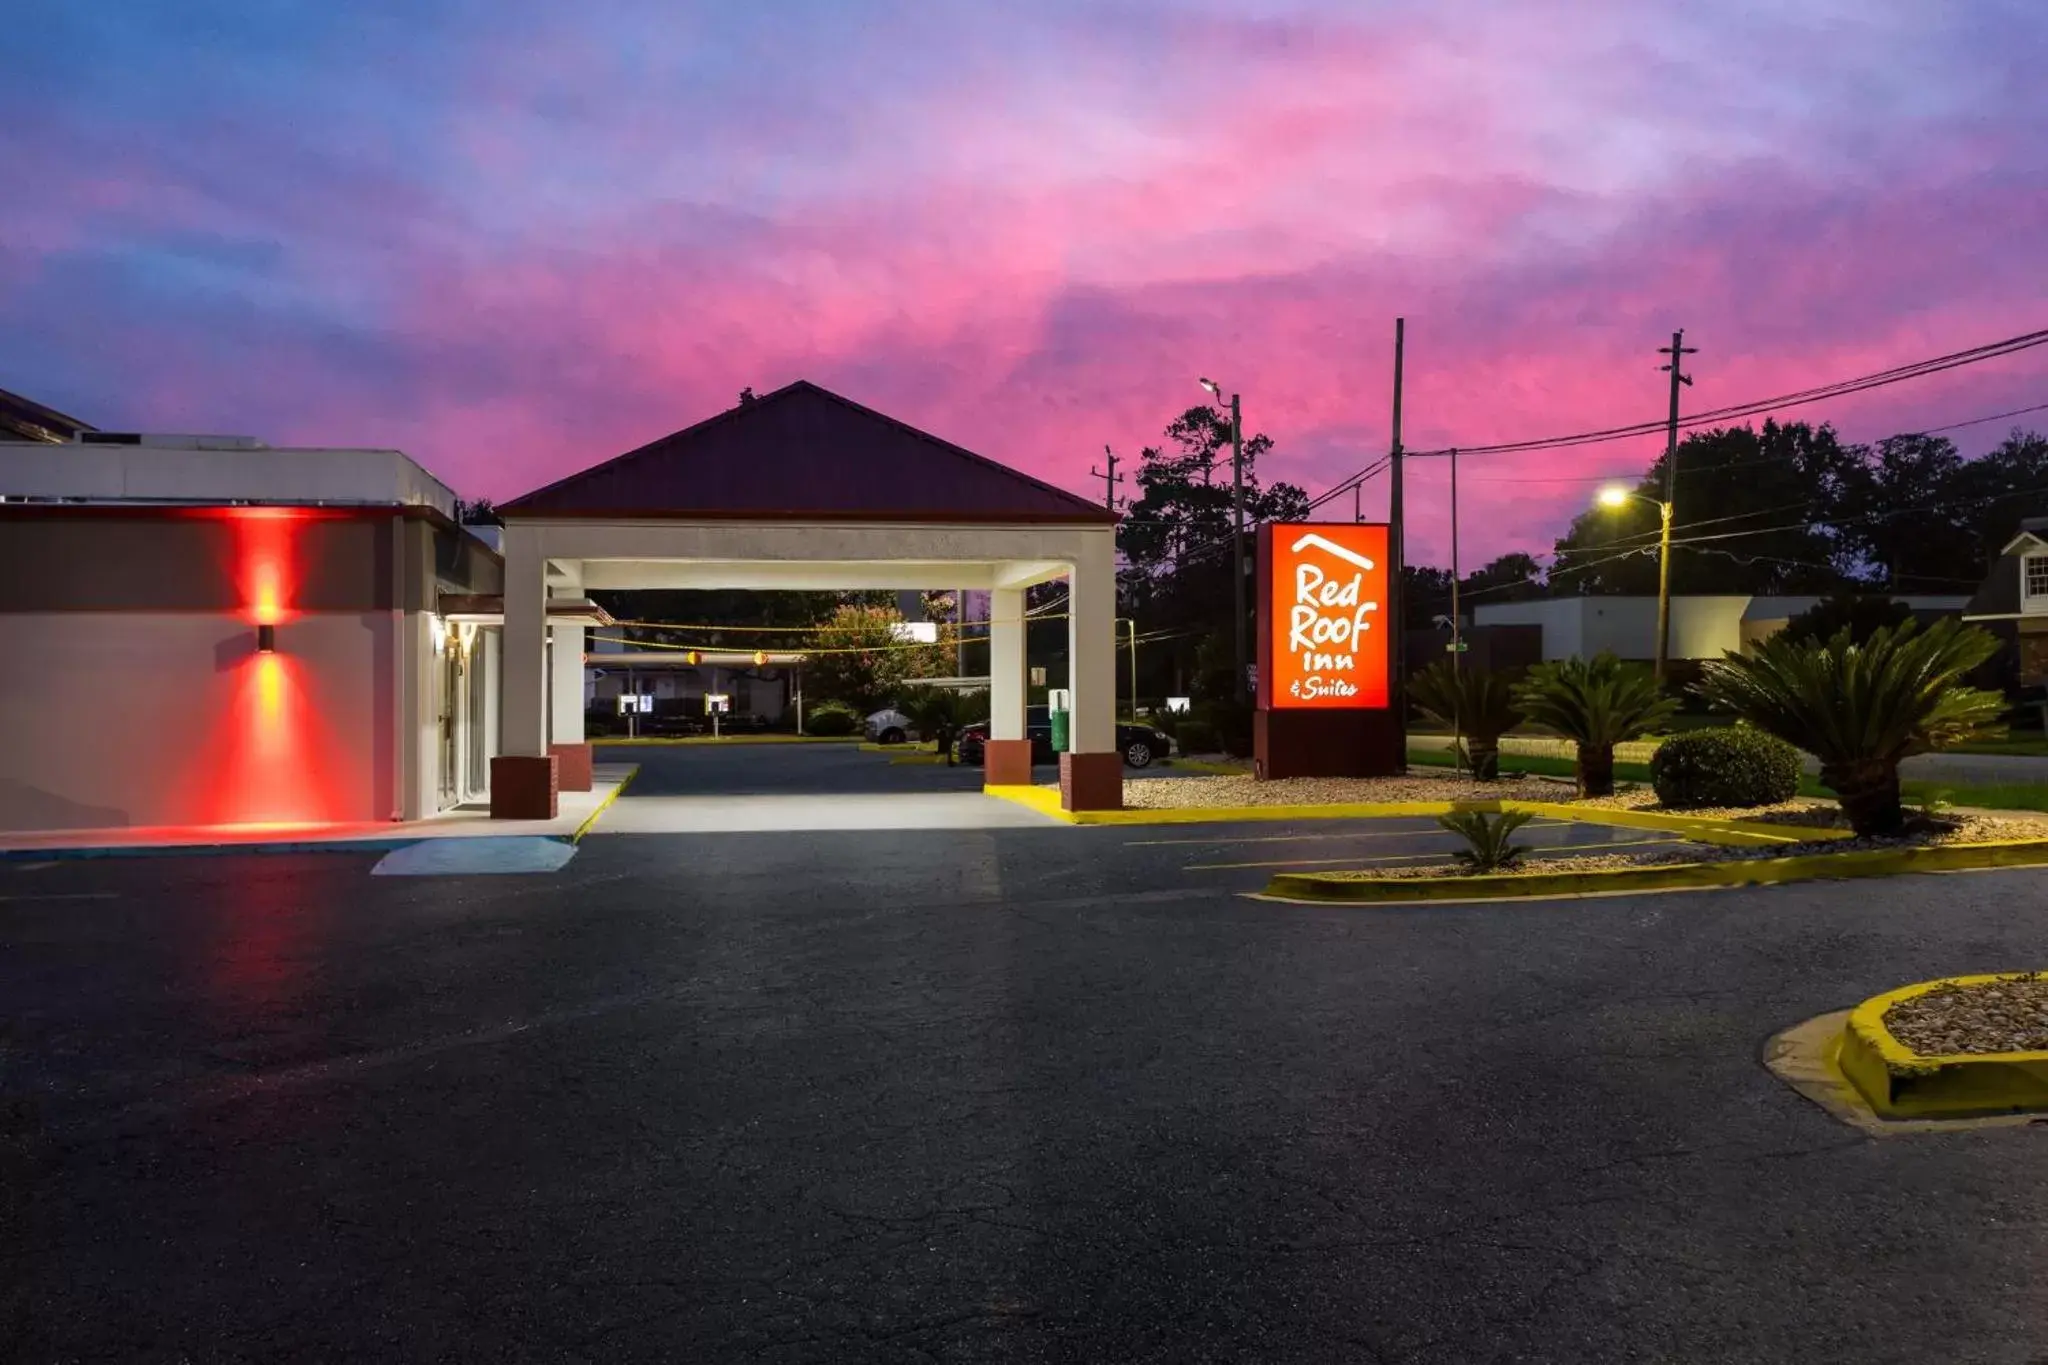 Property Building in Red Roof Inn & Suites Statesboro - University